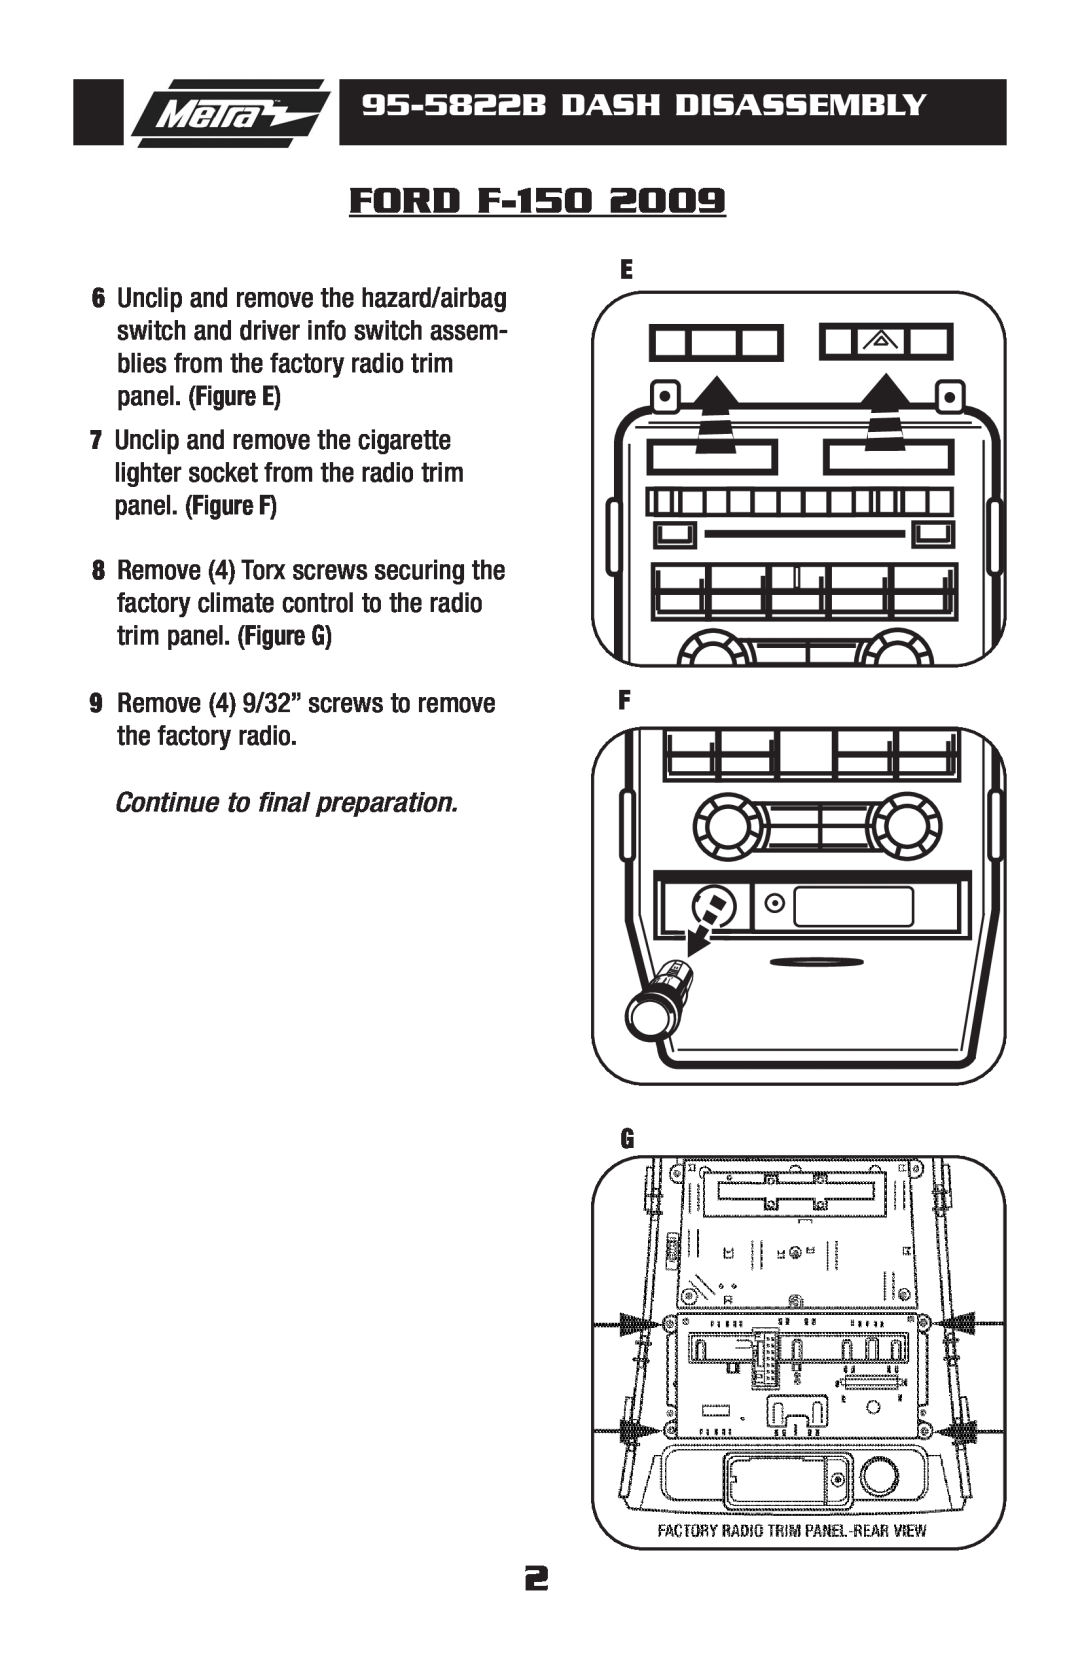 Metra Electronics 955822 installation instructions FORD F-150, Continue to final preparation, 95-5822B DASH DISASSEMBLY 